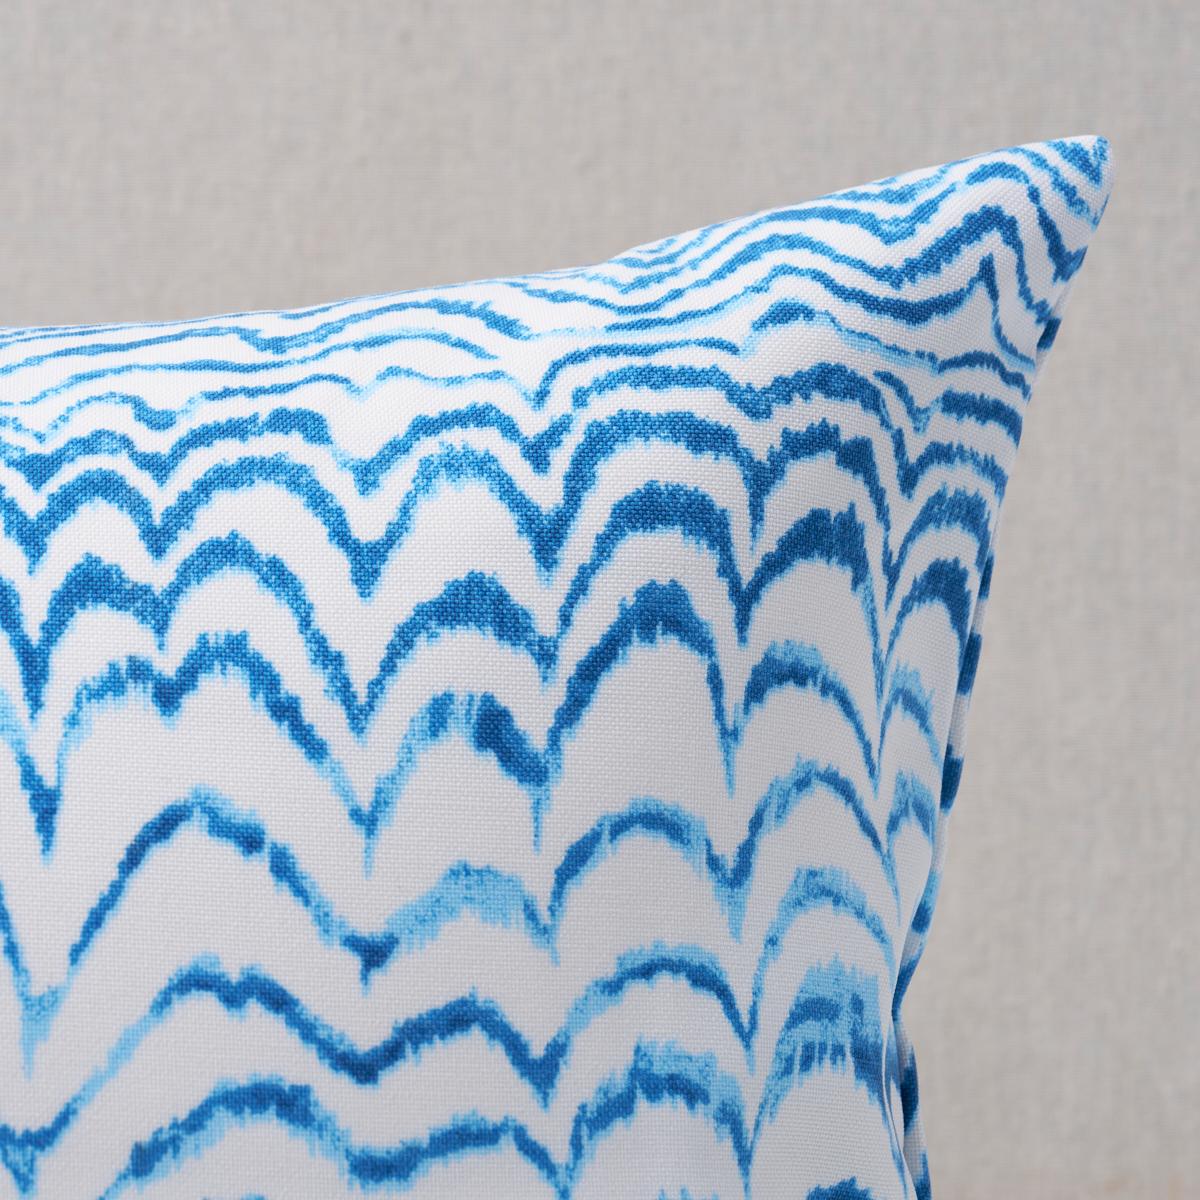 This pillow features Ink Wave Print Indoor/Outdoor by Trina Turk with a knife edge finish. With its unique rippled pattern and watery tones, Ink Wave Print Indoor/Outdoor fabric makes a fabulous statement wherever it goes. Pillow includes a polyfill